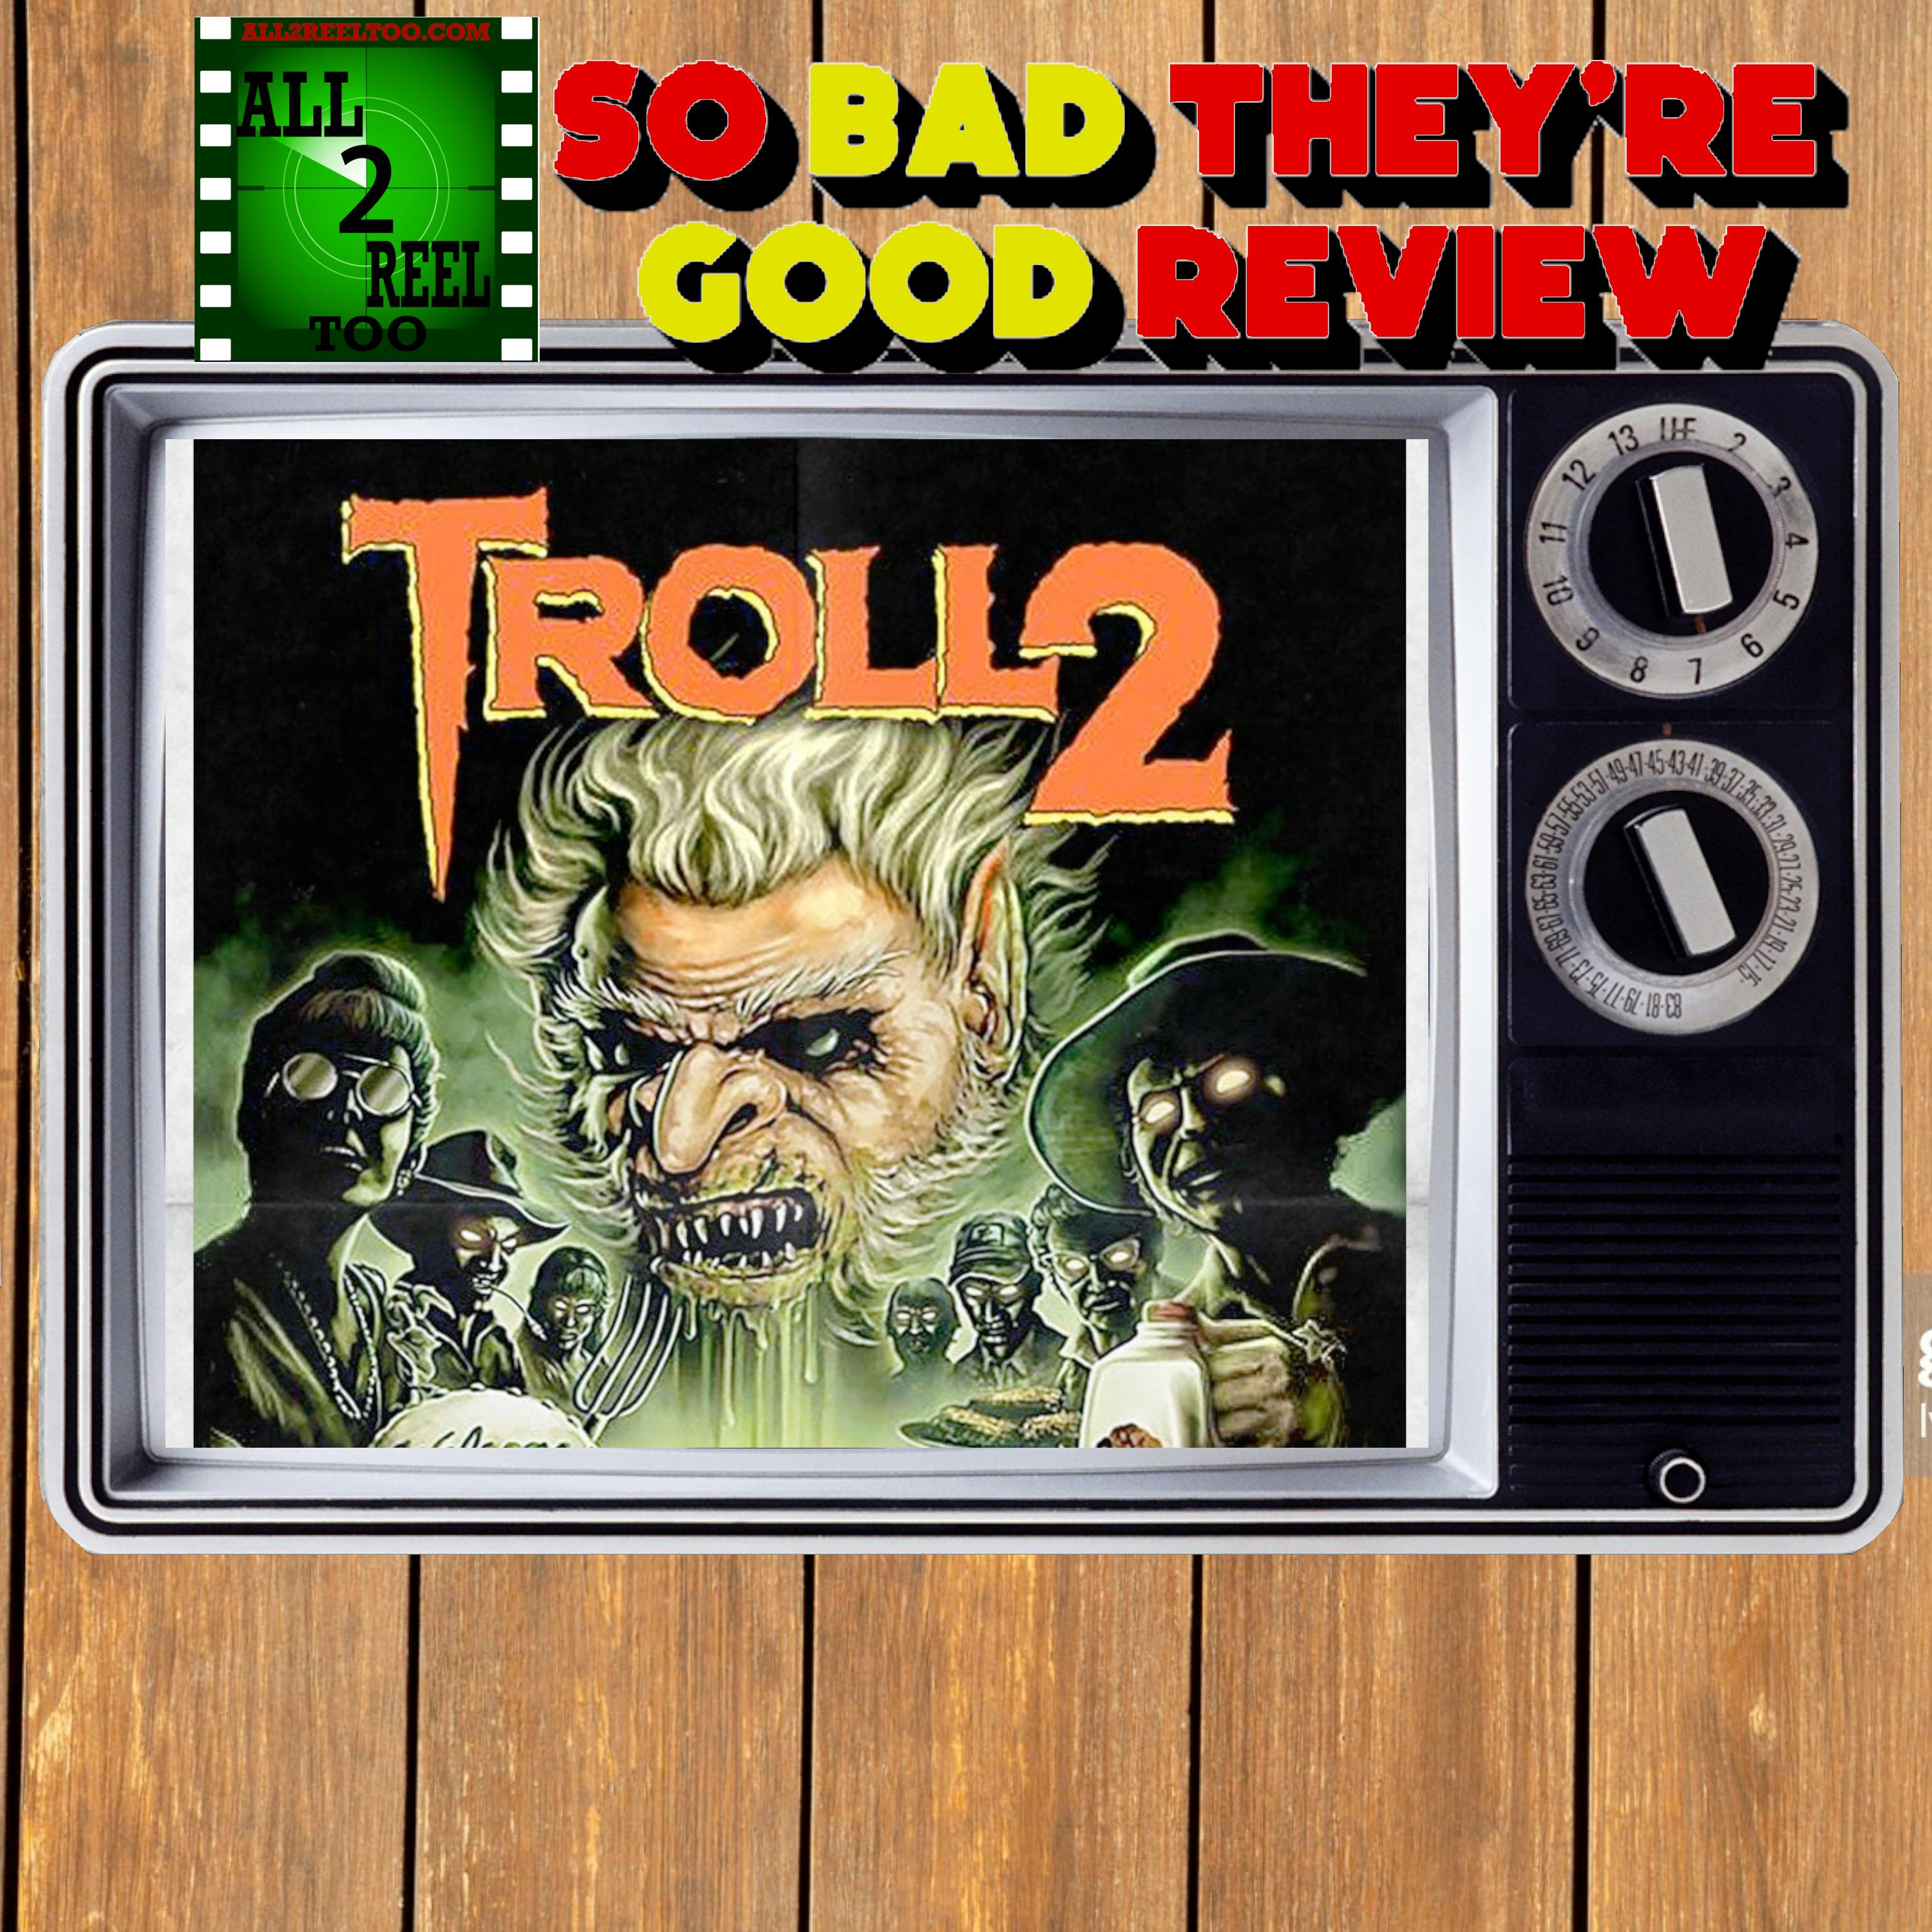 TROLL 2 (1990) - SO BAD THEY'RE GOOD REVIEW